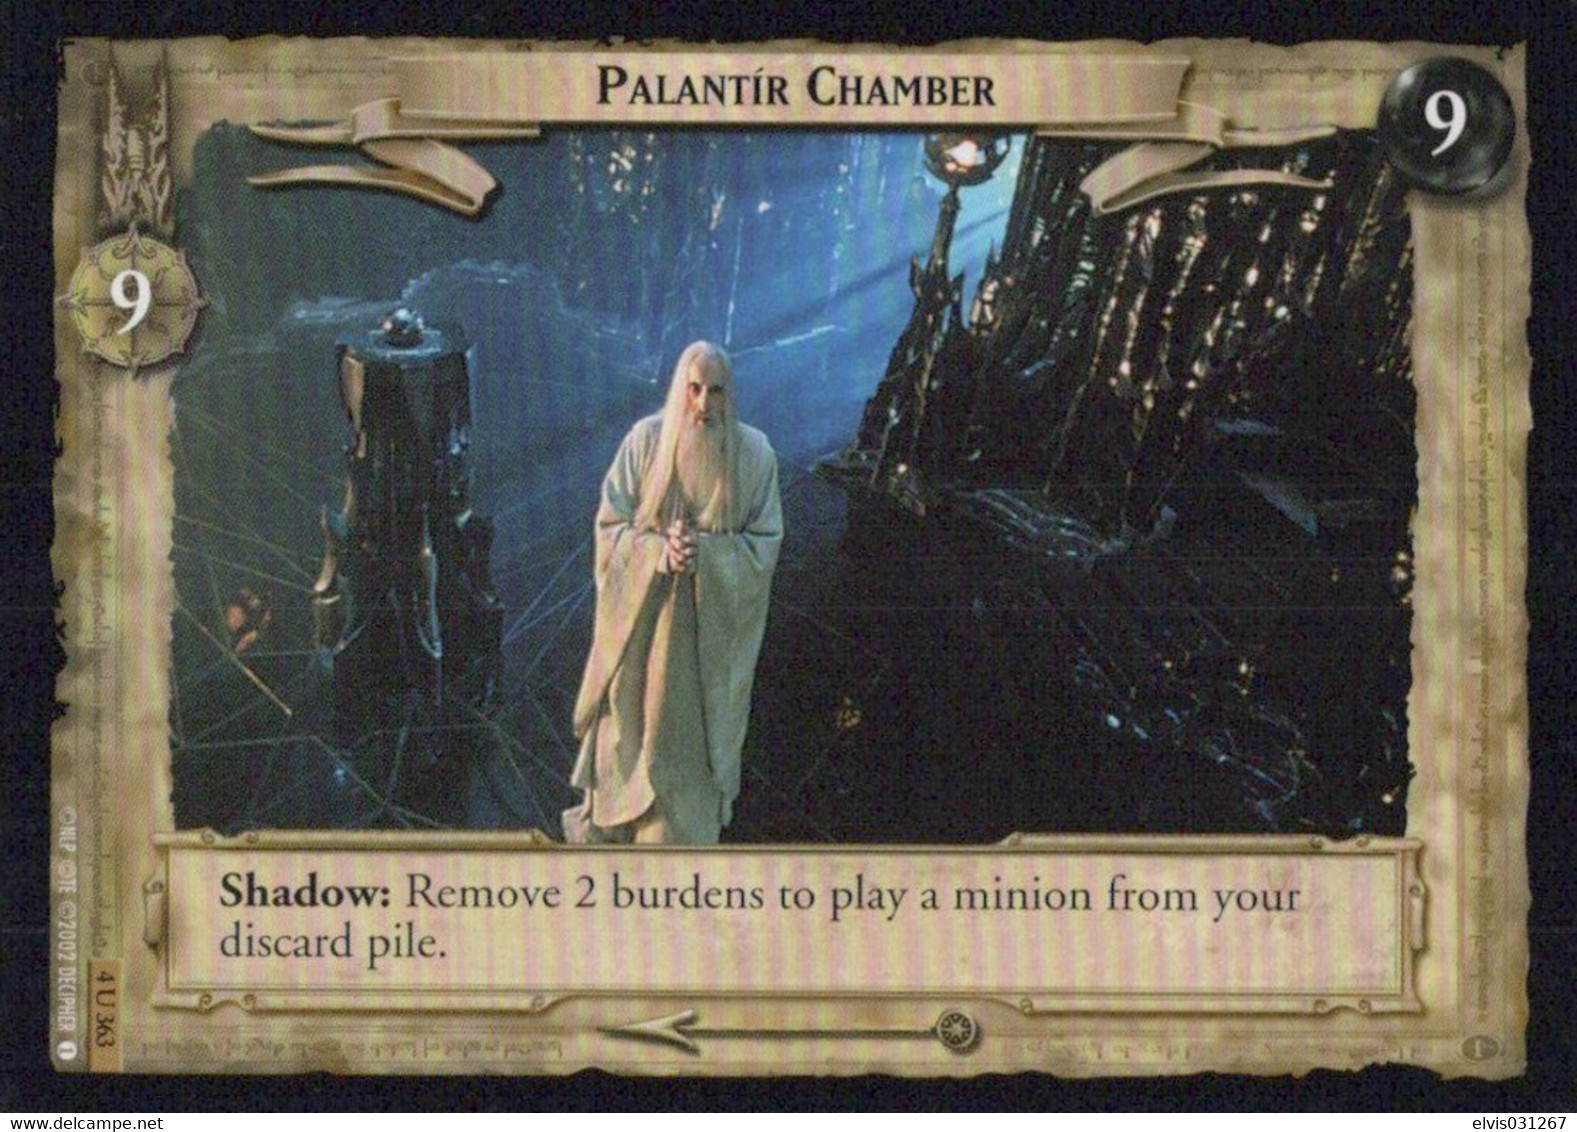 Vintage The Lord Of The Rings: #9-9 Palantir Chamber - EN - 2001-2004 - Mint Condition - Trading Card Game - Herr Der Ringe